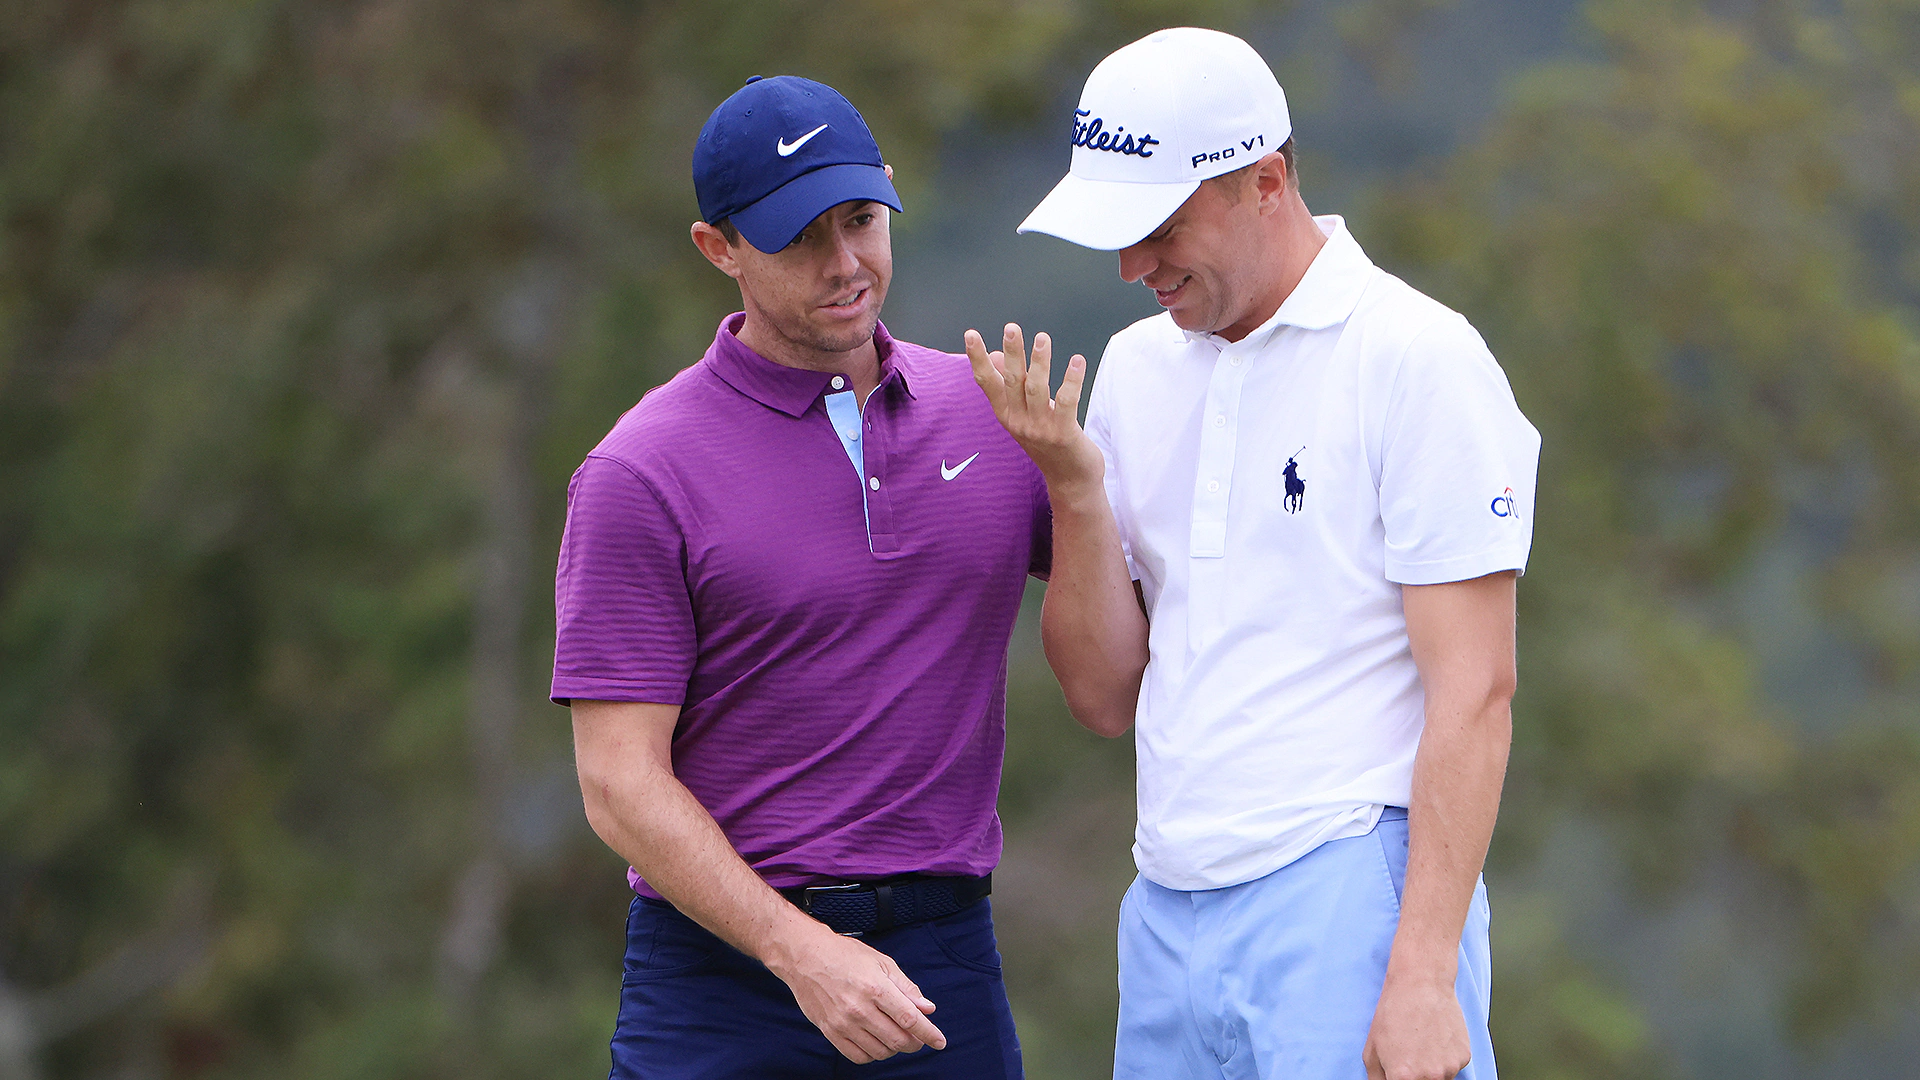 Justin Thomas, Rory McIlroy to Play Abu Dhabi in First Rolex Series Event of 2021